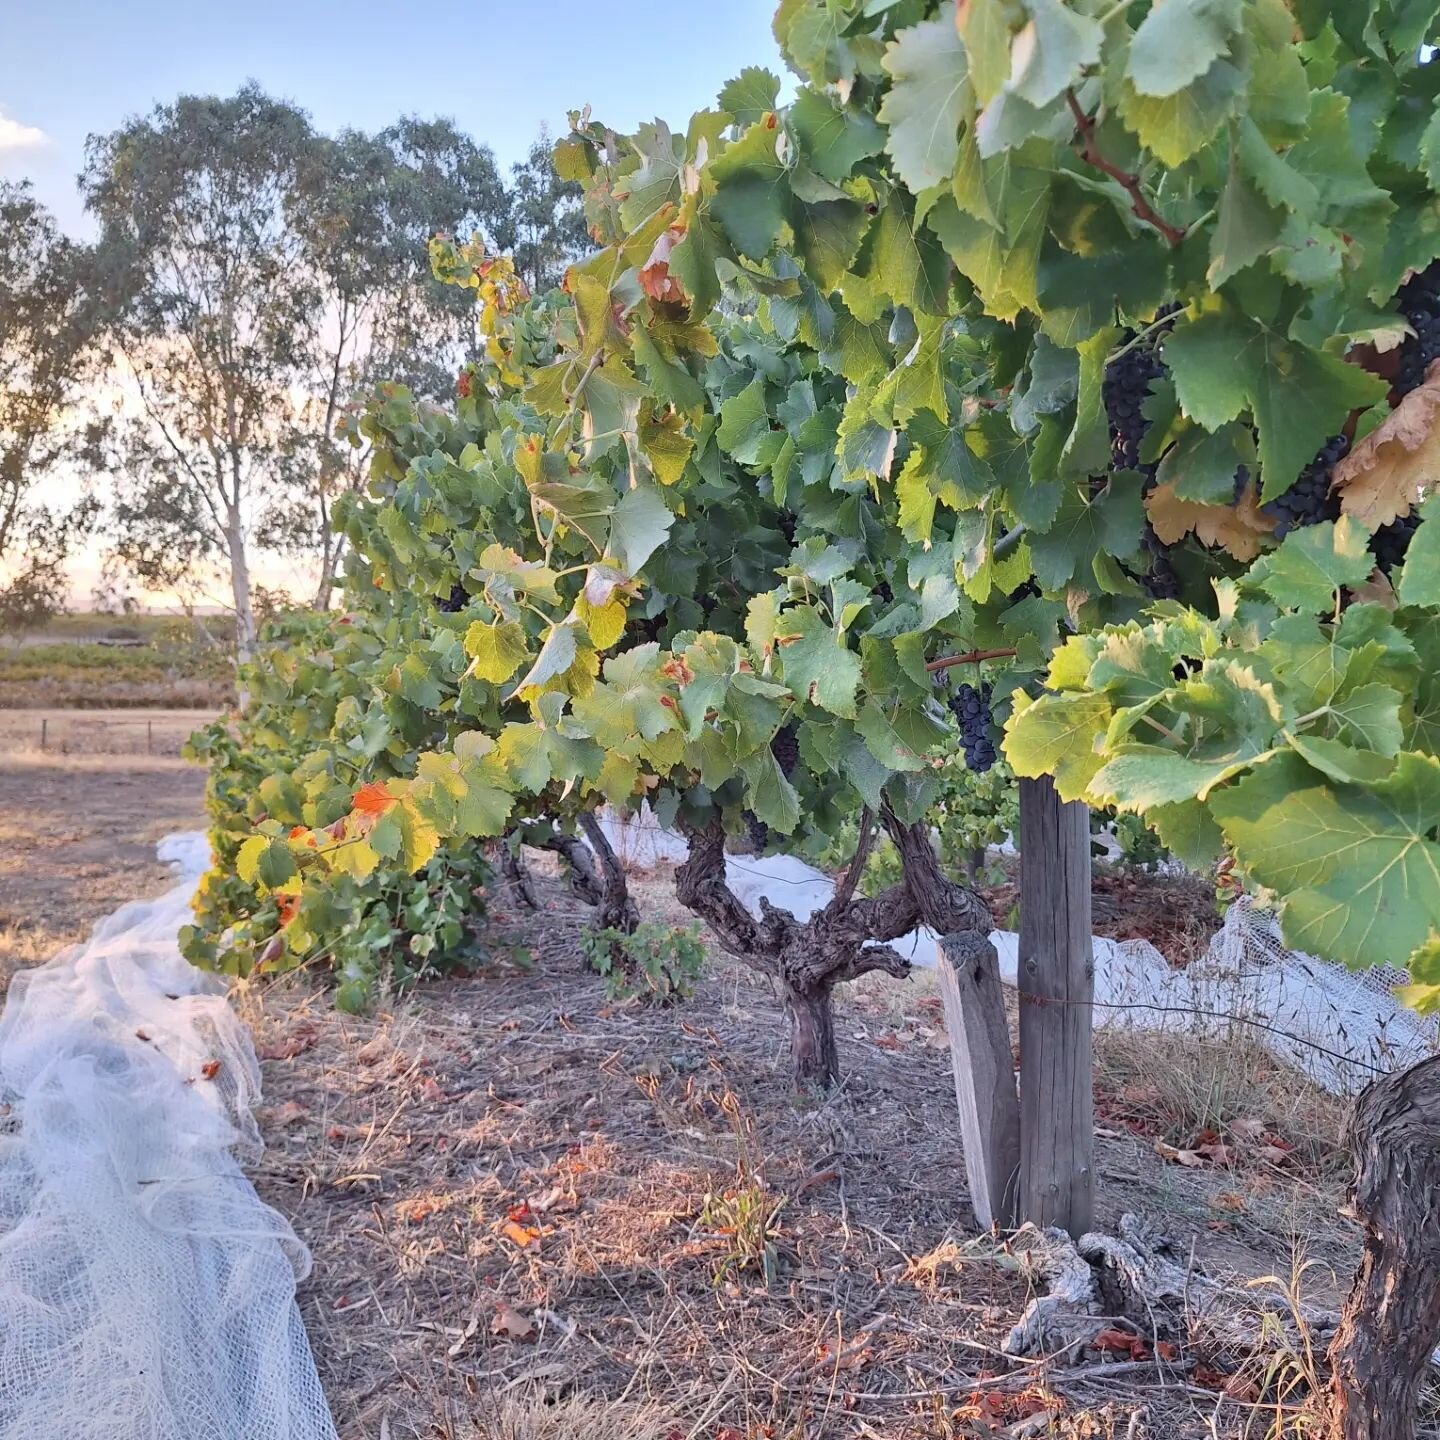 19/3 picking of old vine grenache out at cockatoo Valley. Being dry grown, the vines benefited from the wet start to the summer, with the season finishing perfectly for the grenache variety, showing excellent varietal flavours

#grenache #oldvinegren